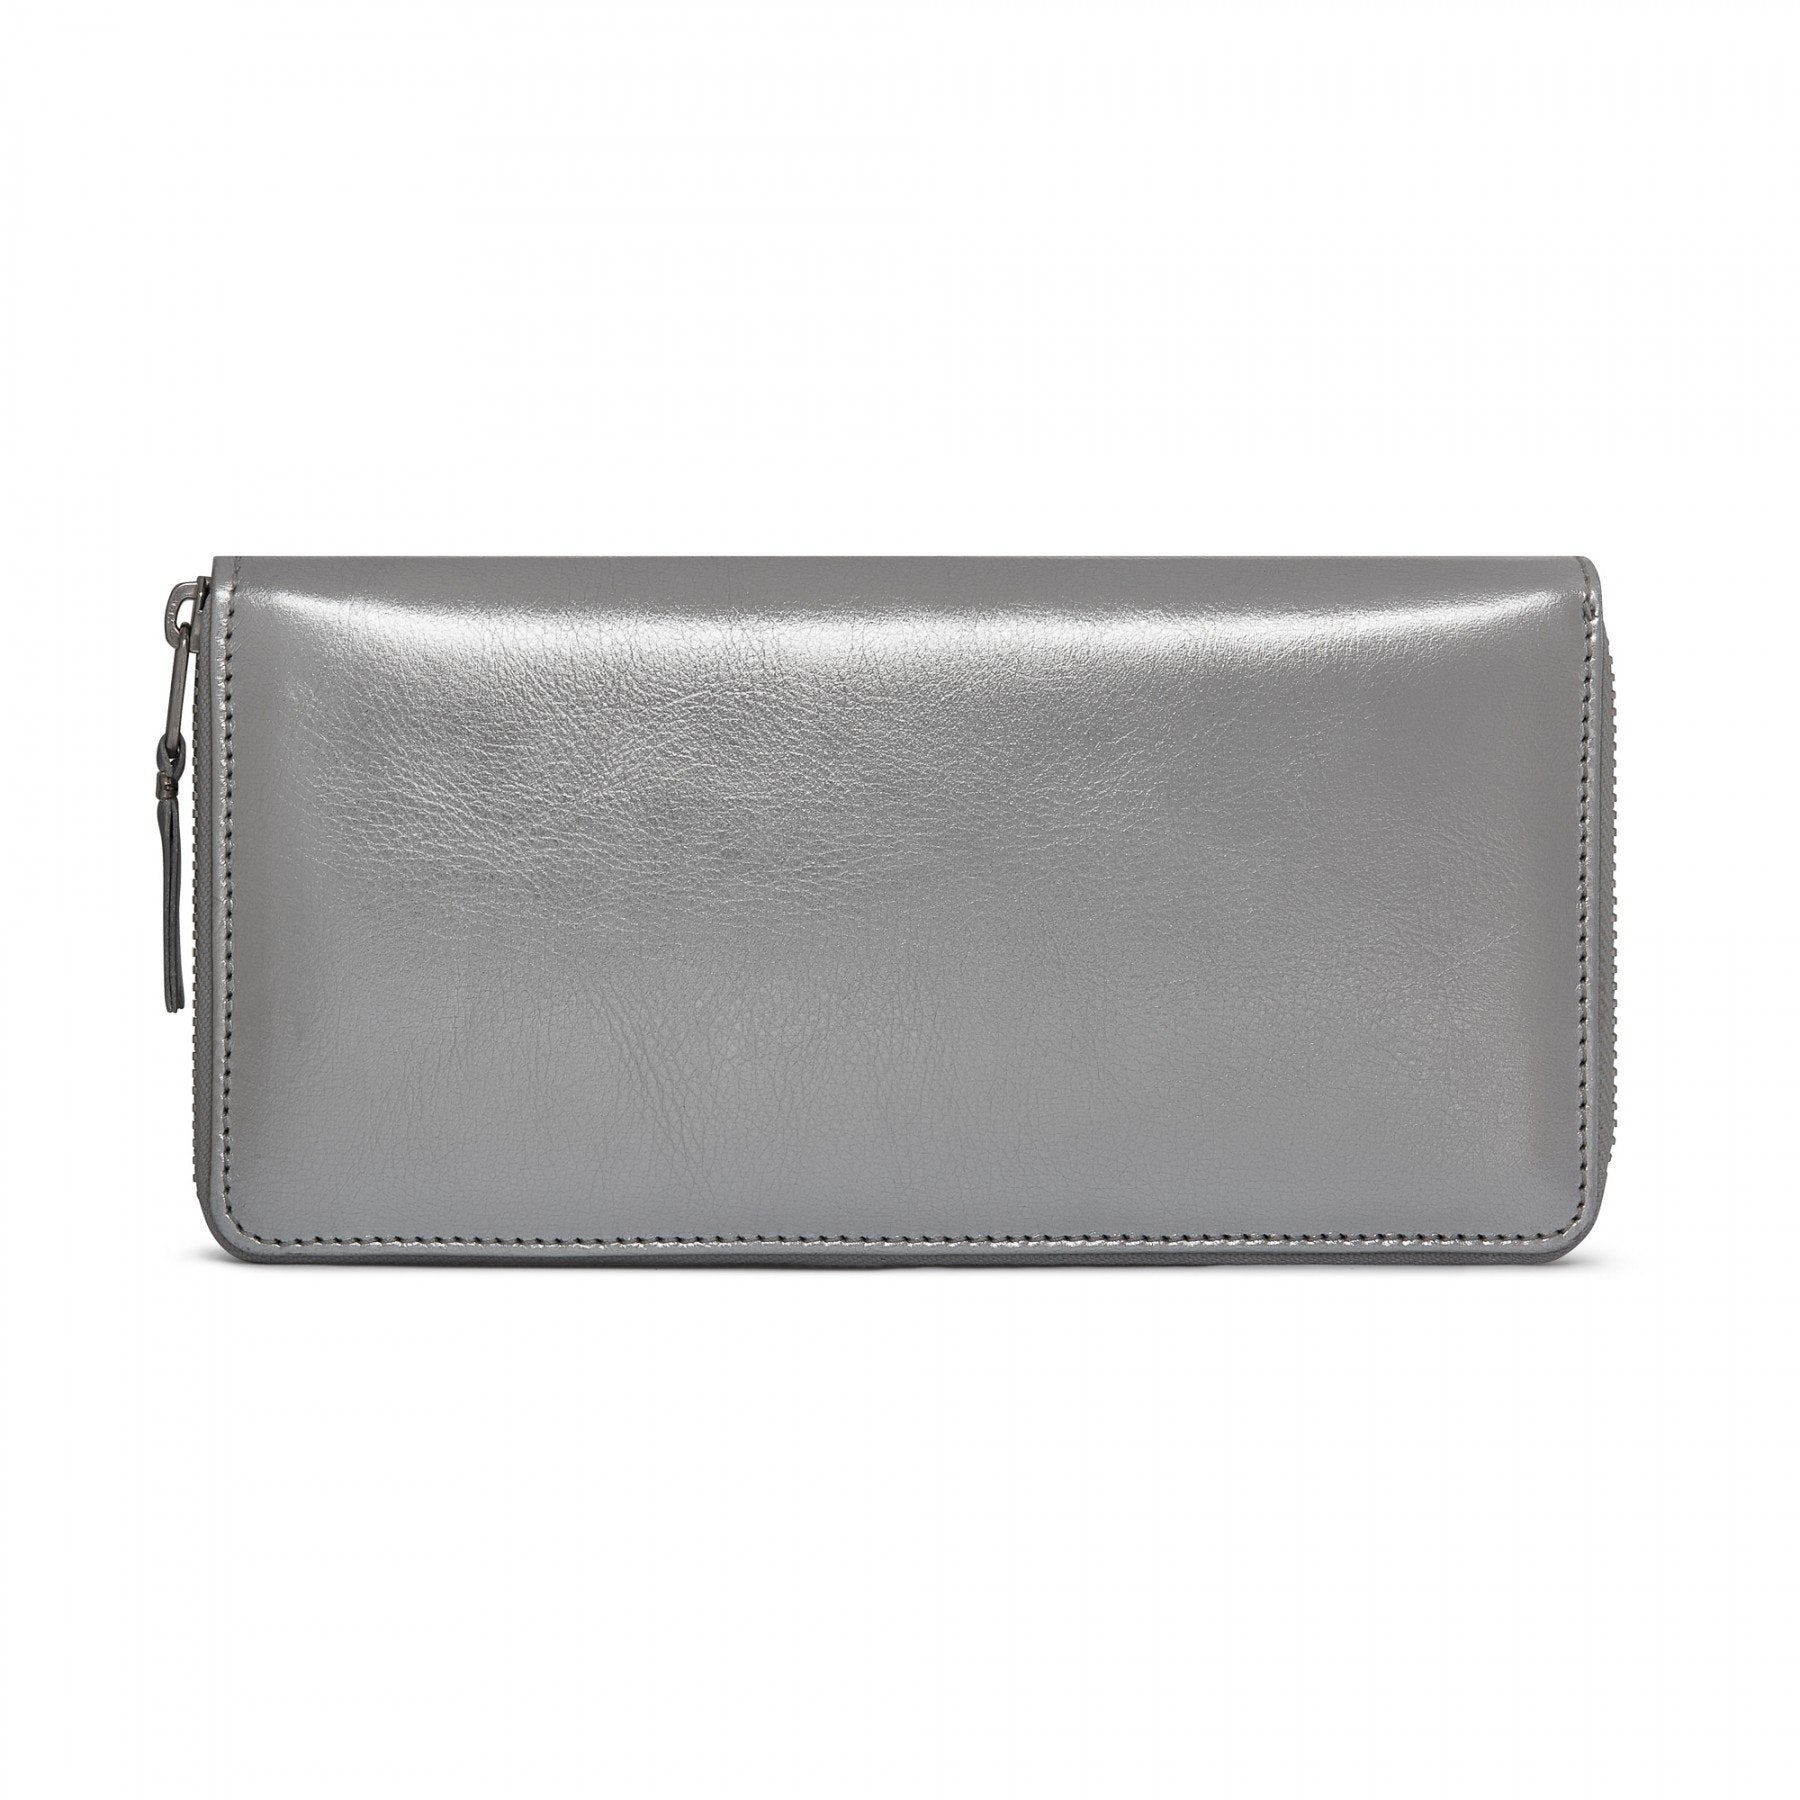 Gold and Silver Group Wallet 0110GSS